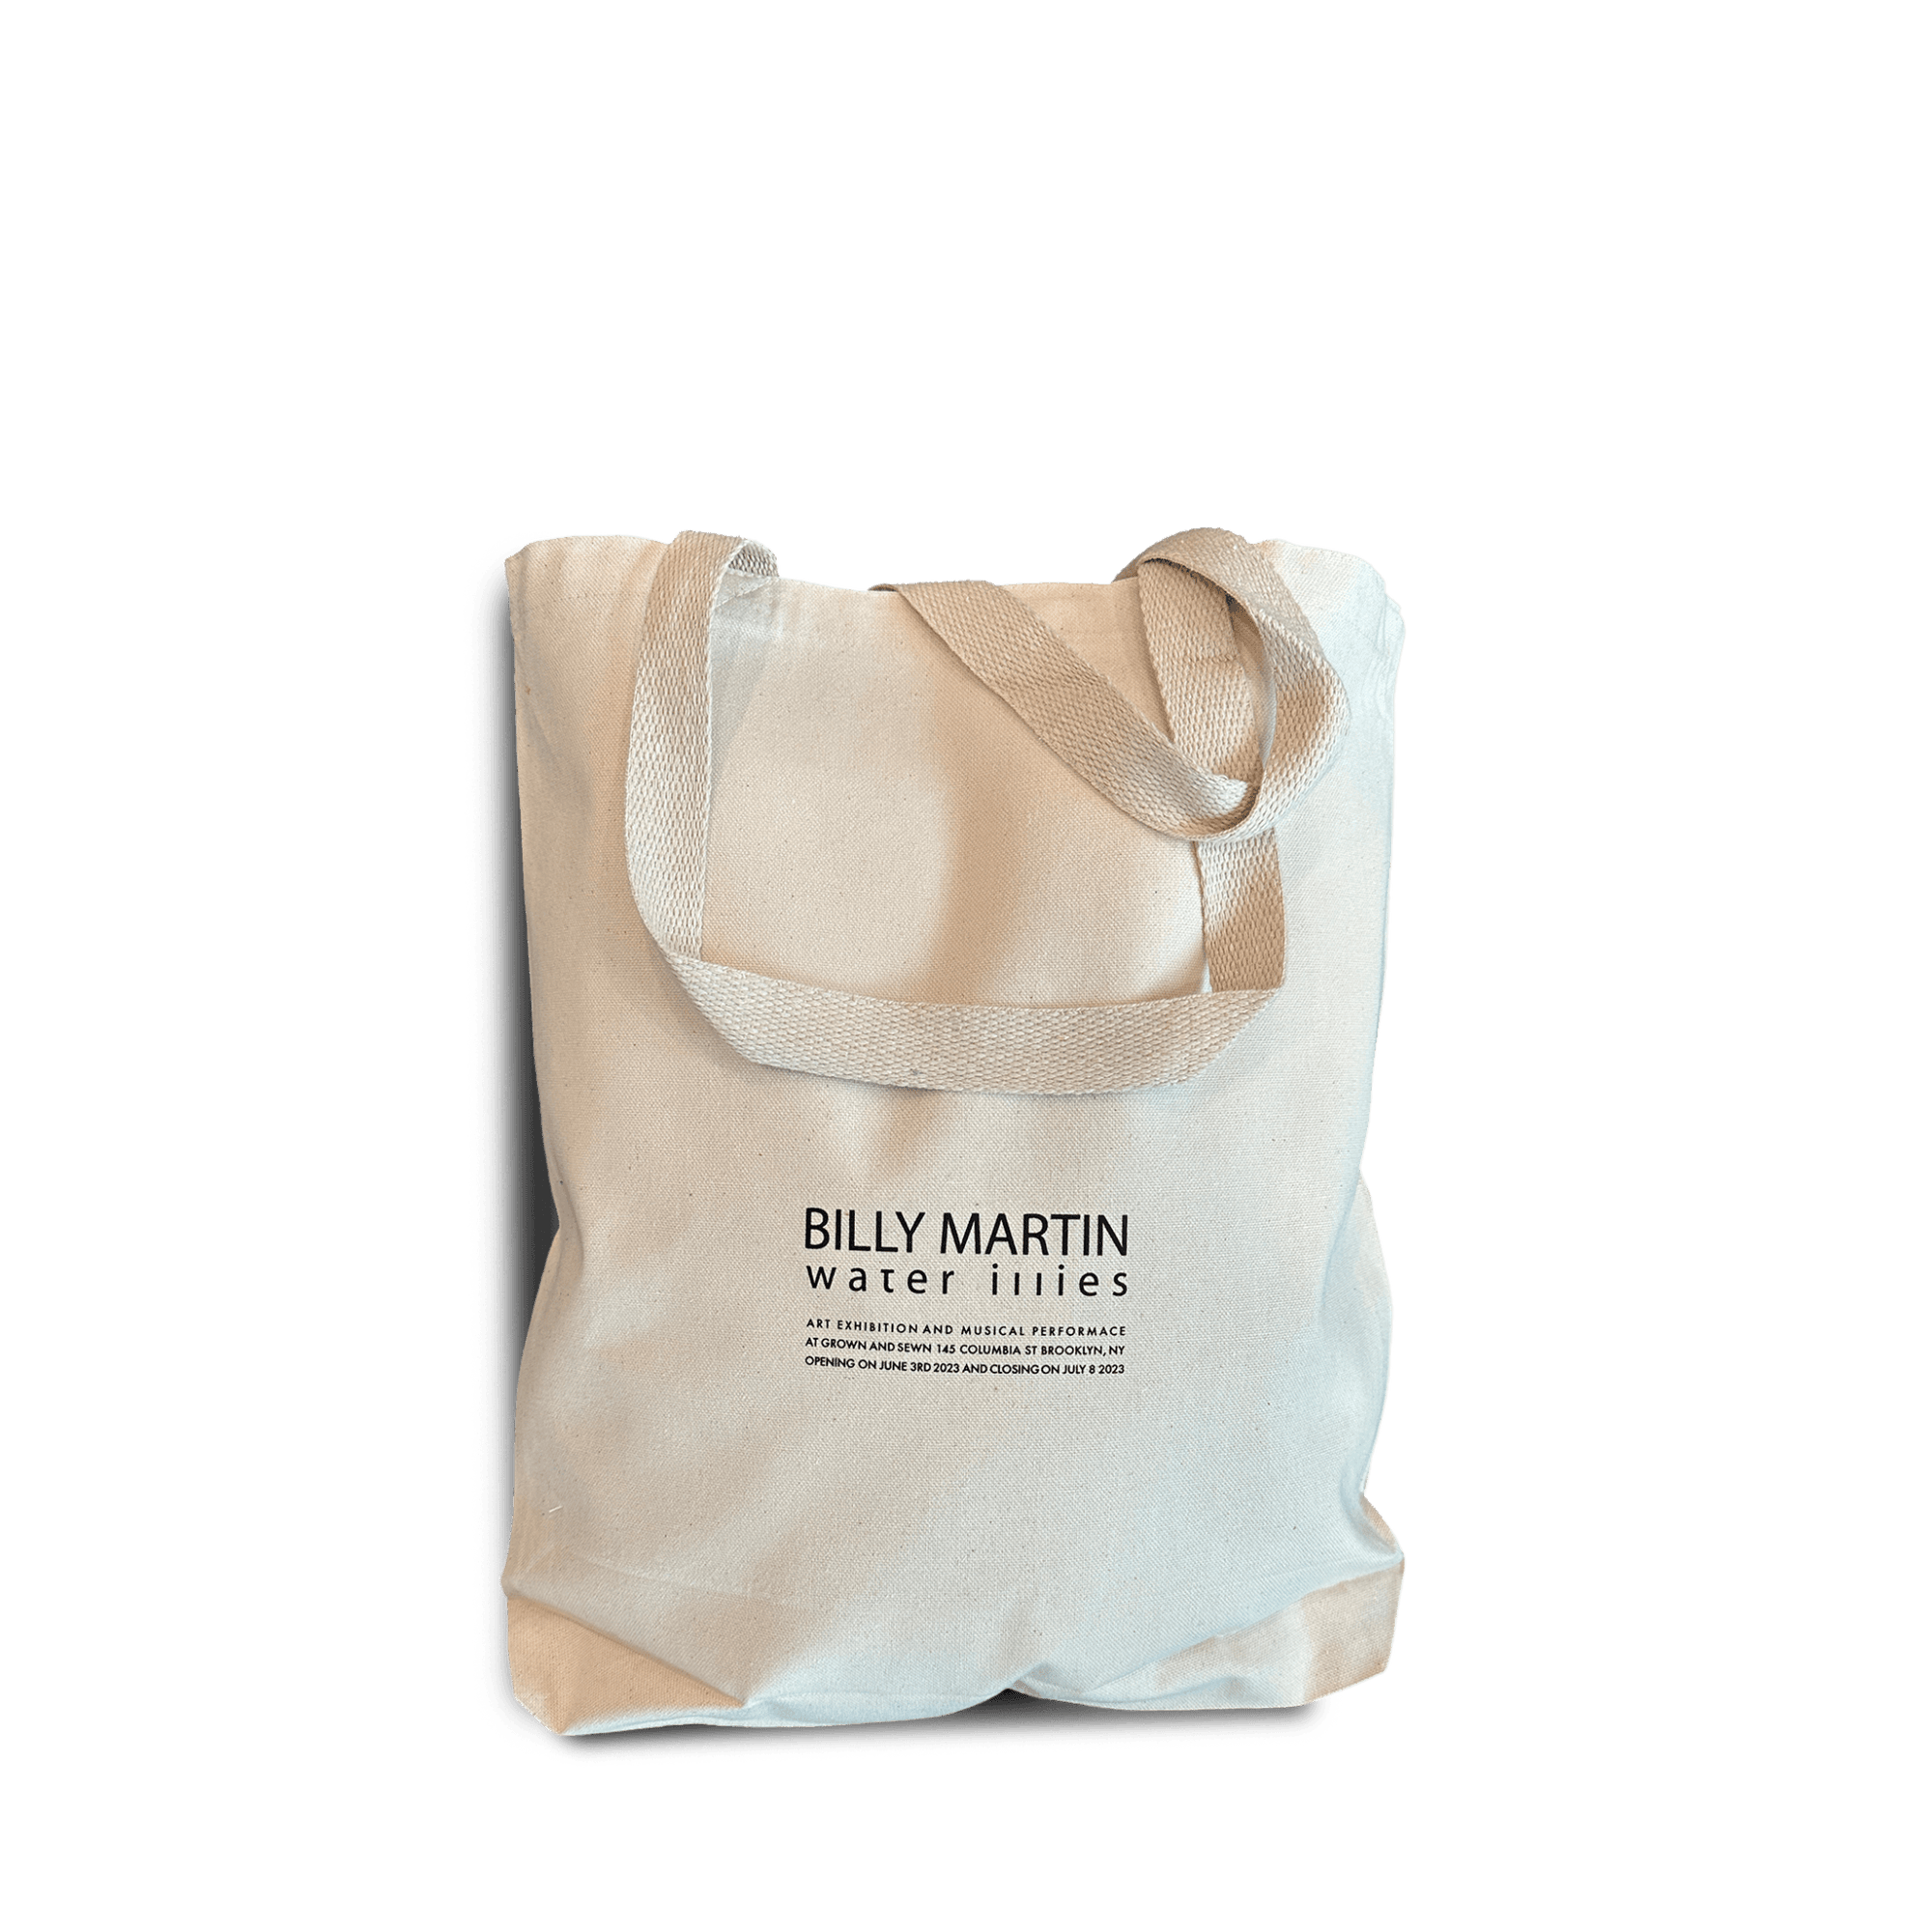 Billy Martin "Water illies" Tote Bag - Graphic Score - grown&sewn